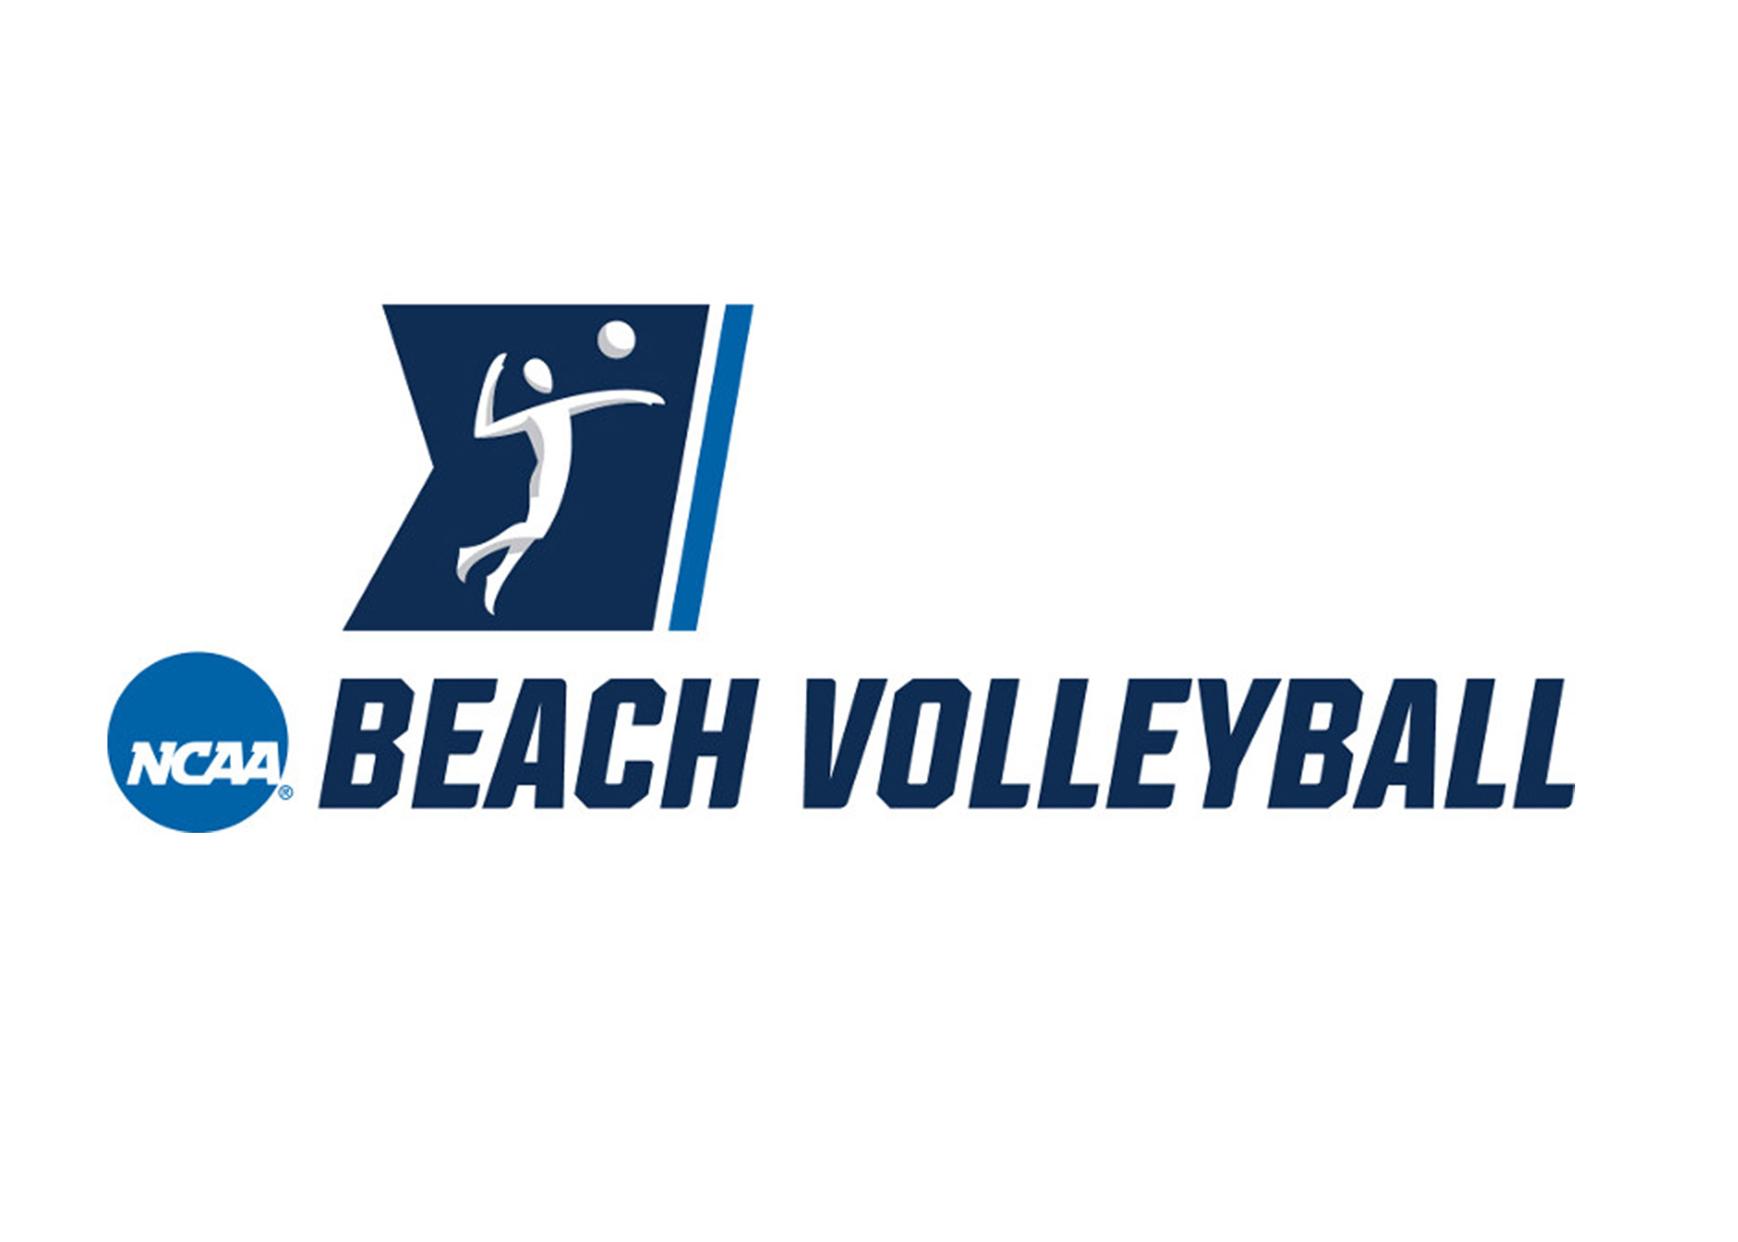 Huntingdon to begin competing in beach volleyball in 2017